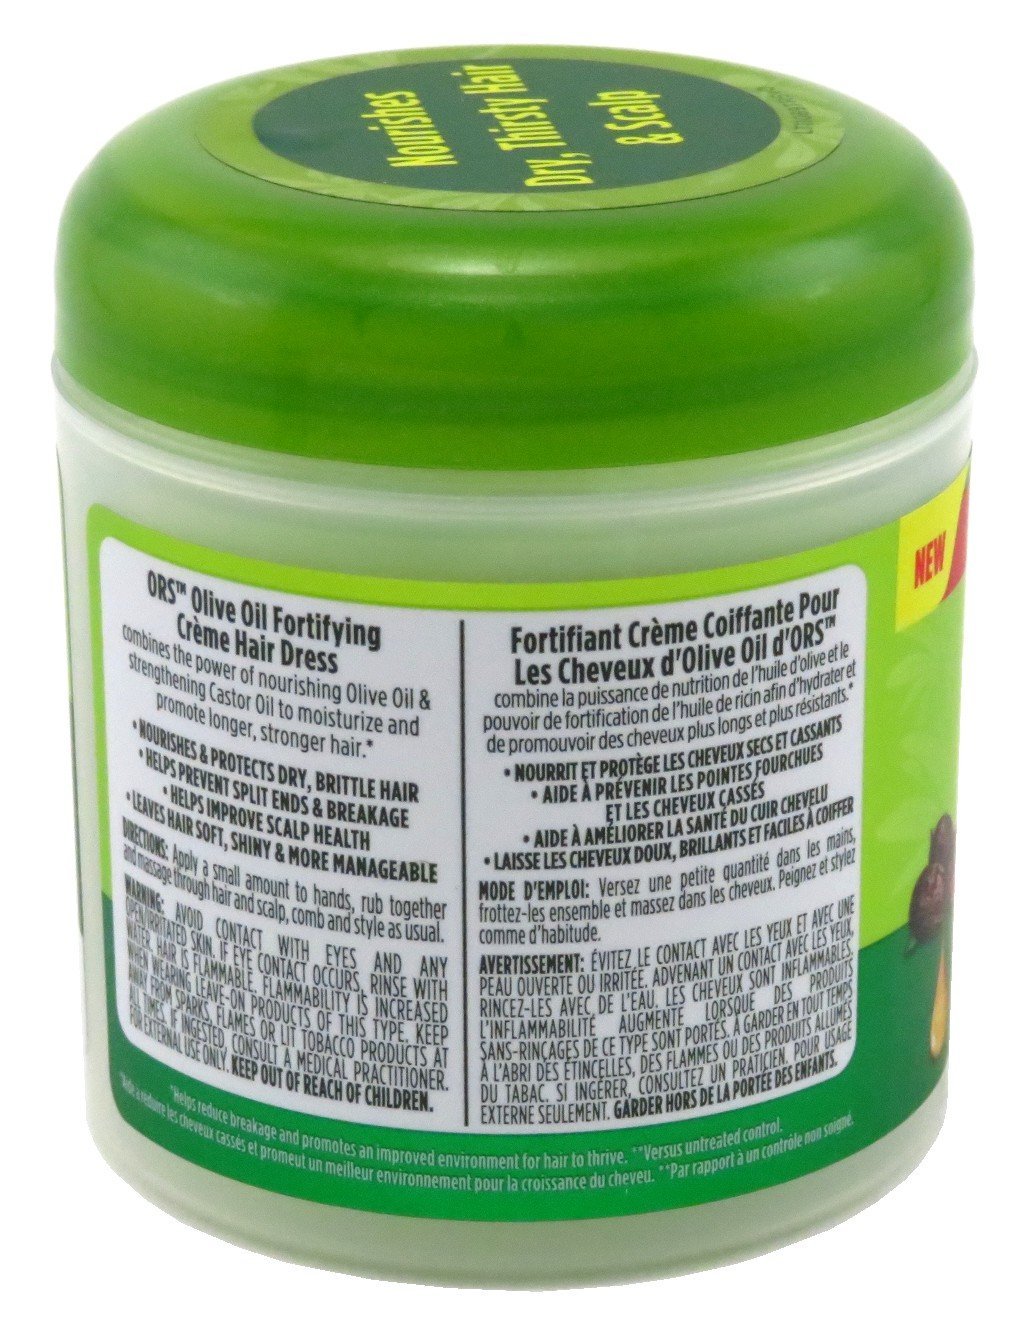 Ors Olive Oil Creme Hair Dress 6 Ounce Jar 177ml - image 2 of 2